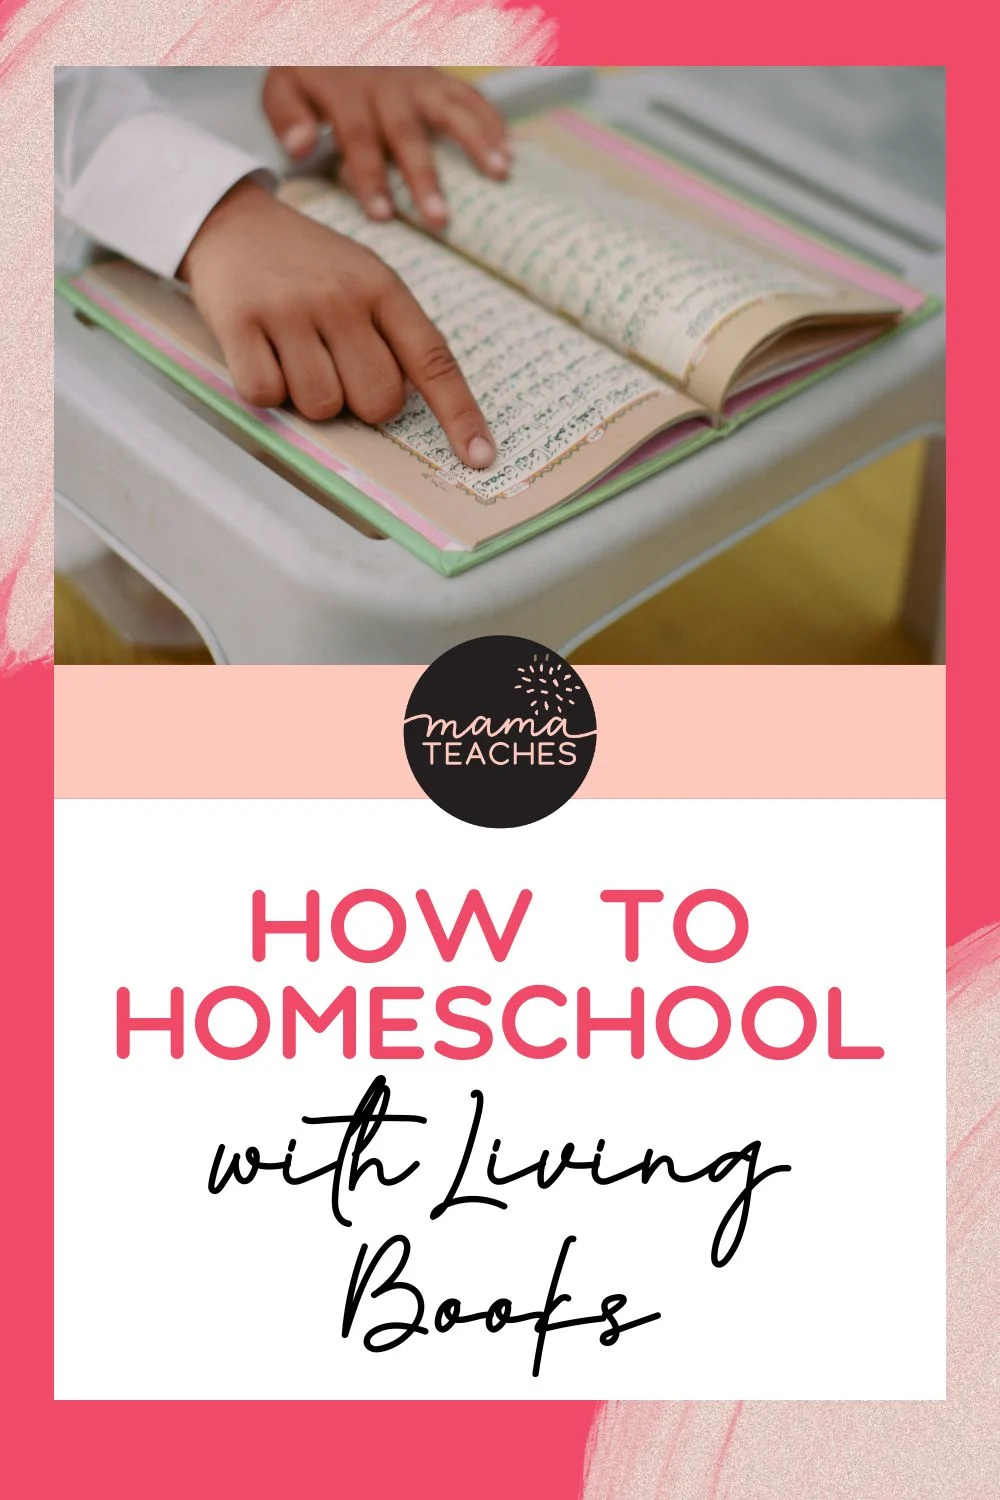 How to Homeschool with Living Books